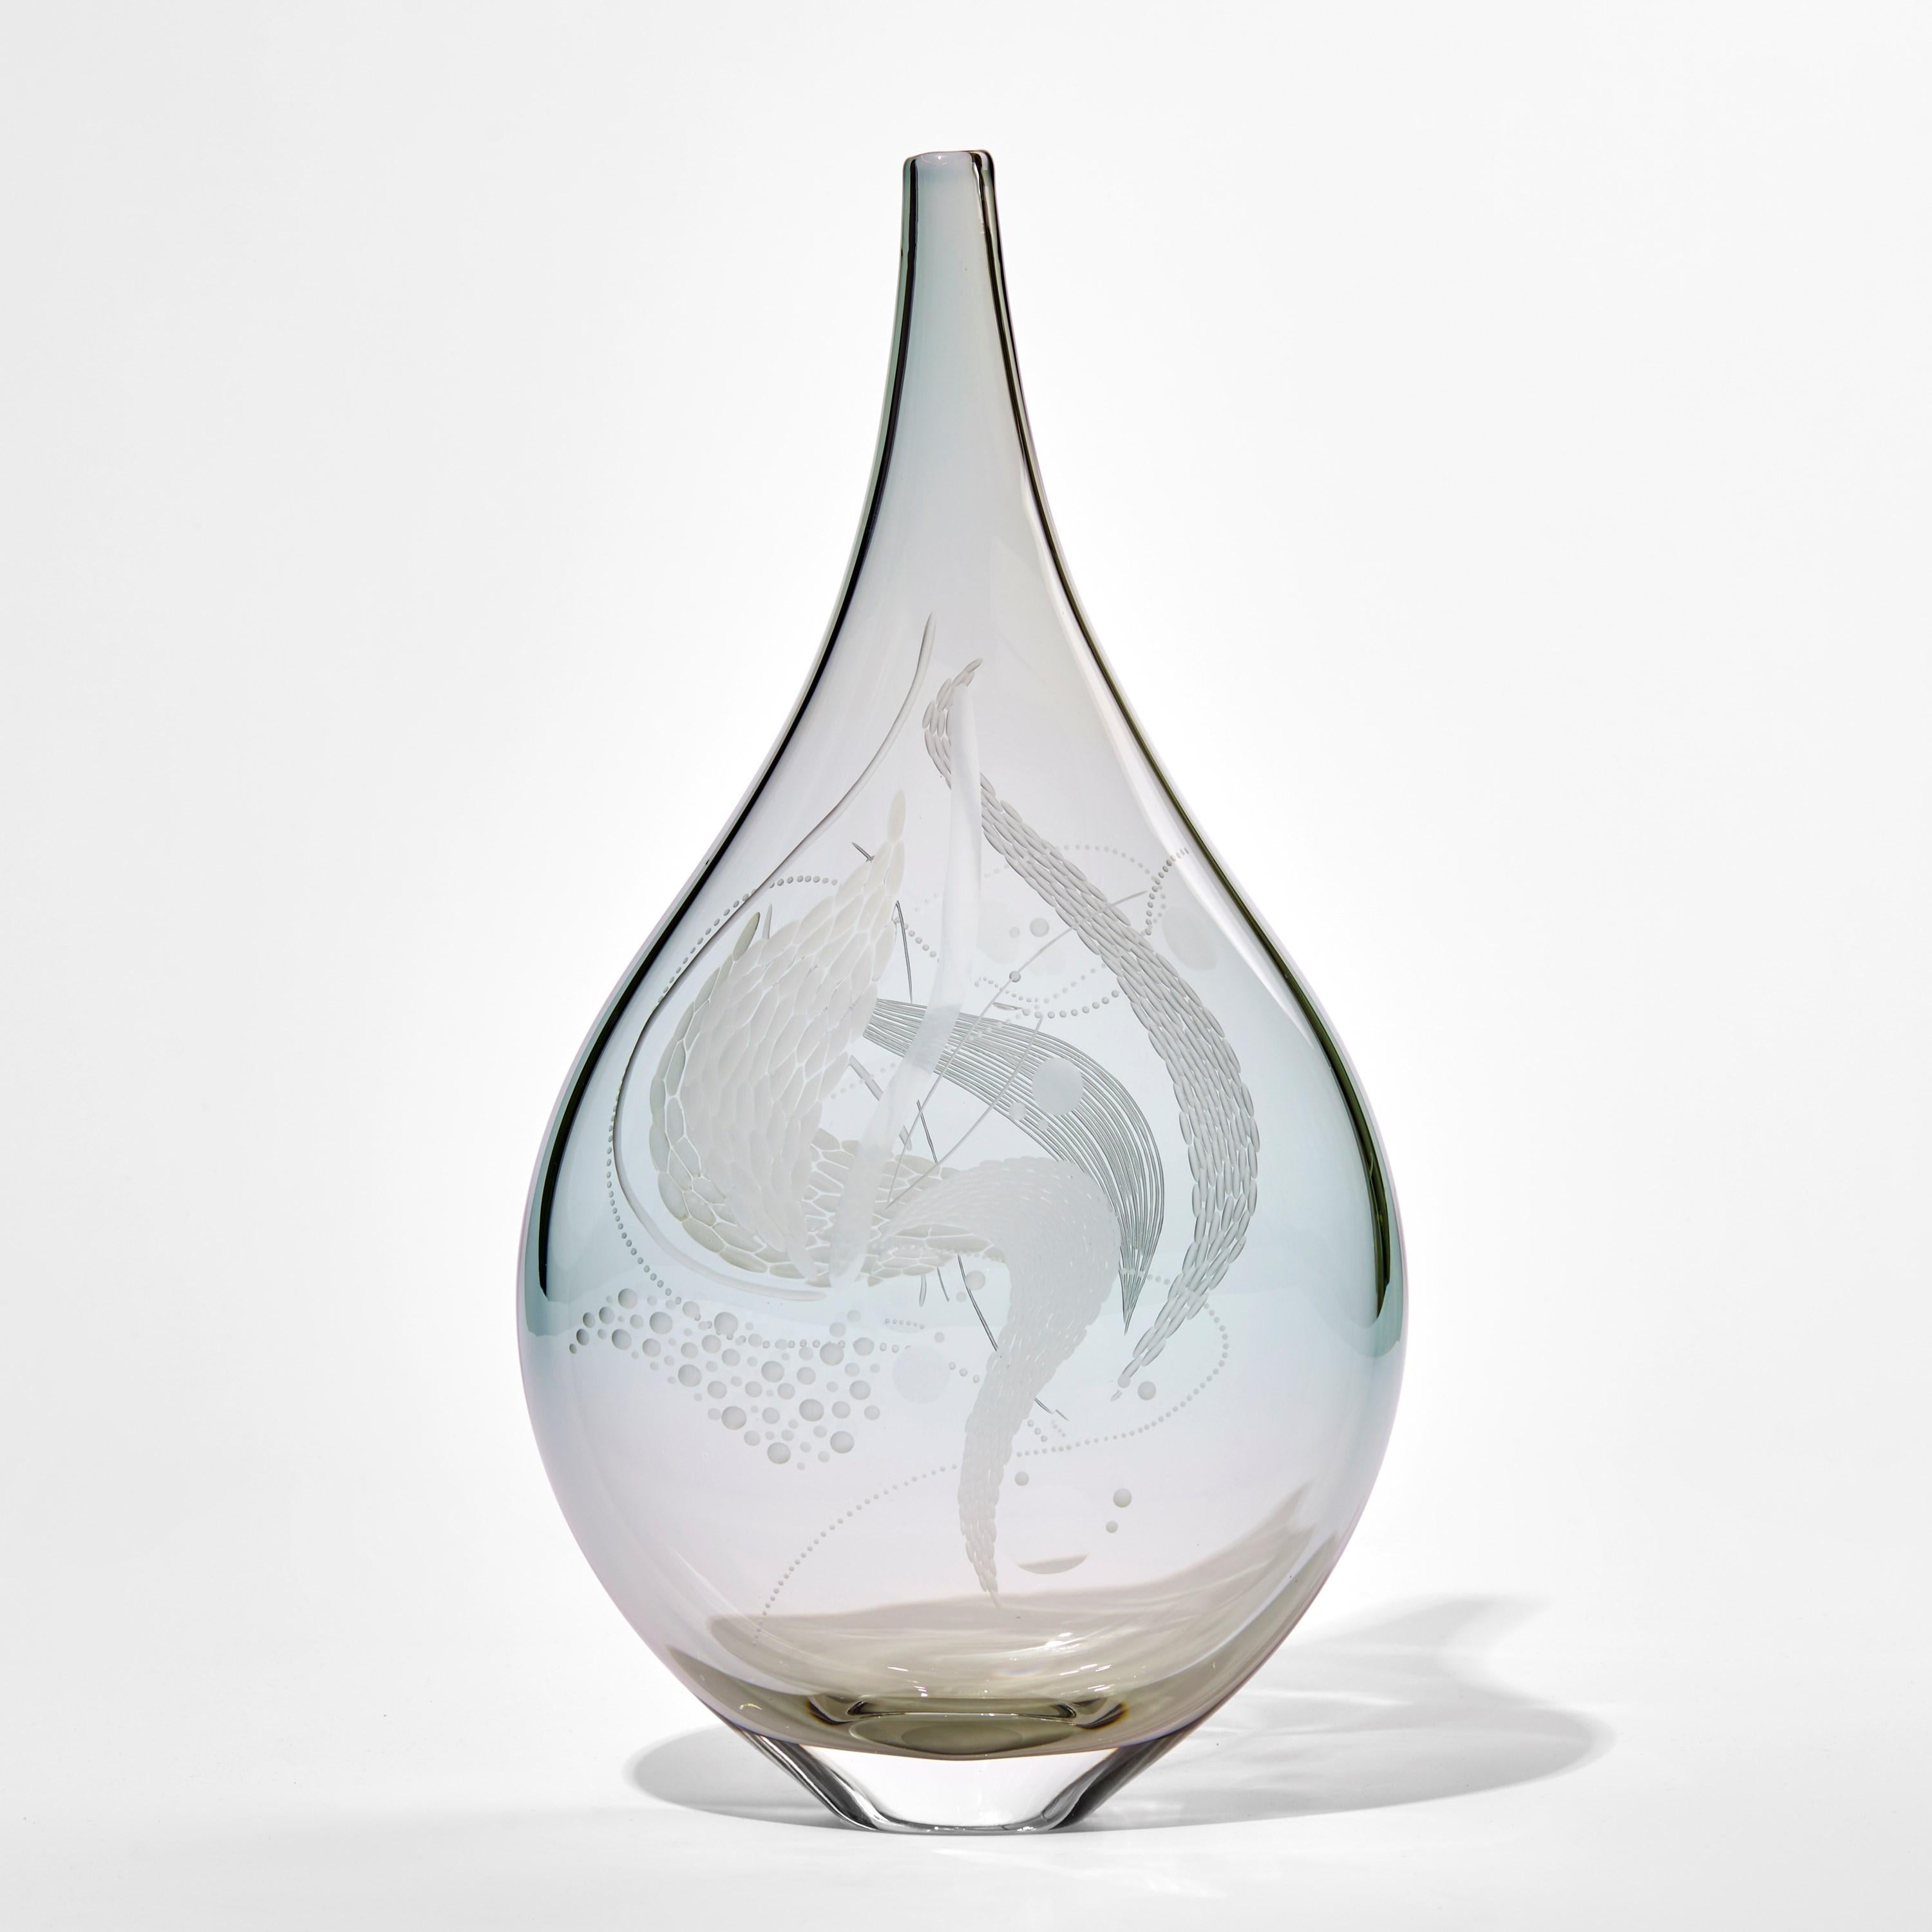 Mariniere vase III is a unique art glass sculptural vessel in soft grey and green, covered in the British artist, Heather Gillespie's signature engraving. Treating the three-dimensional object as her canvas, no two pieces are the same.

If one